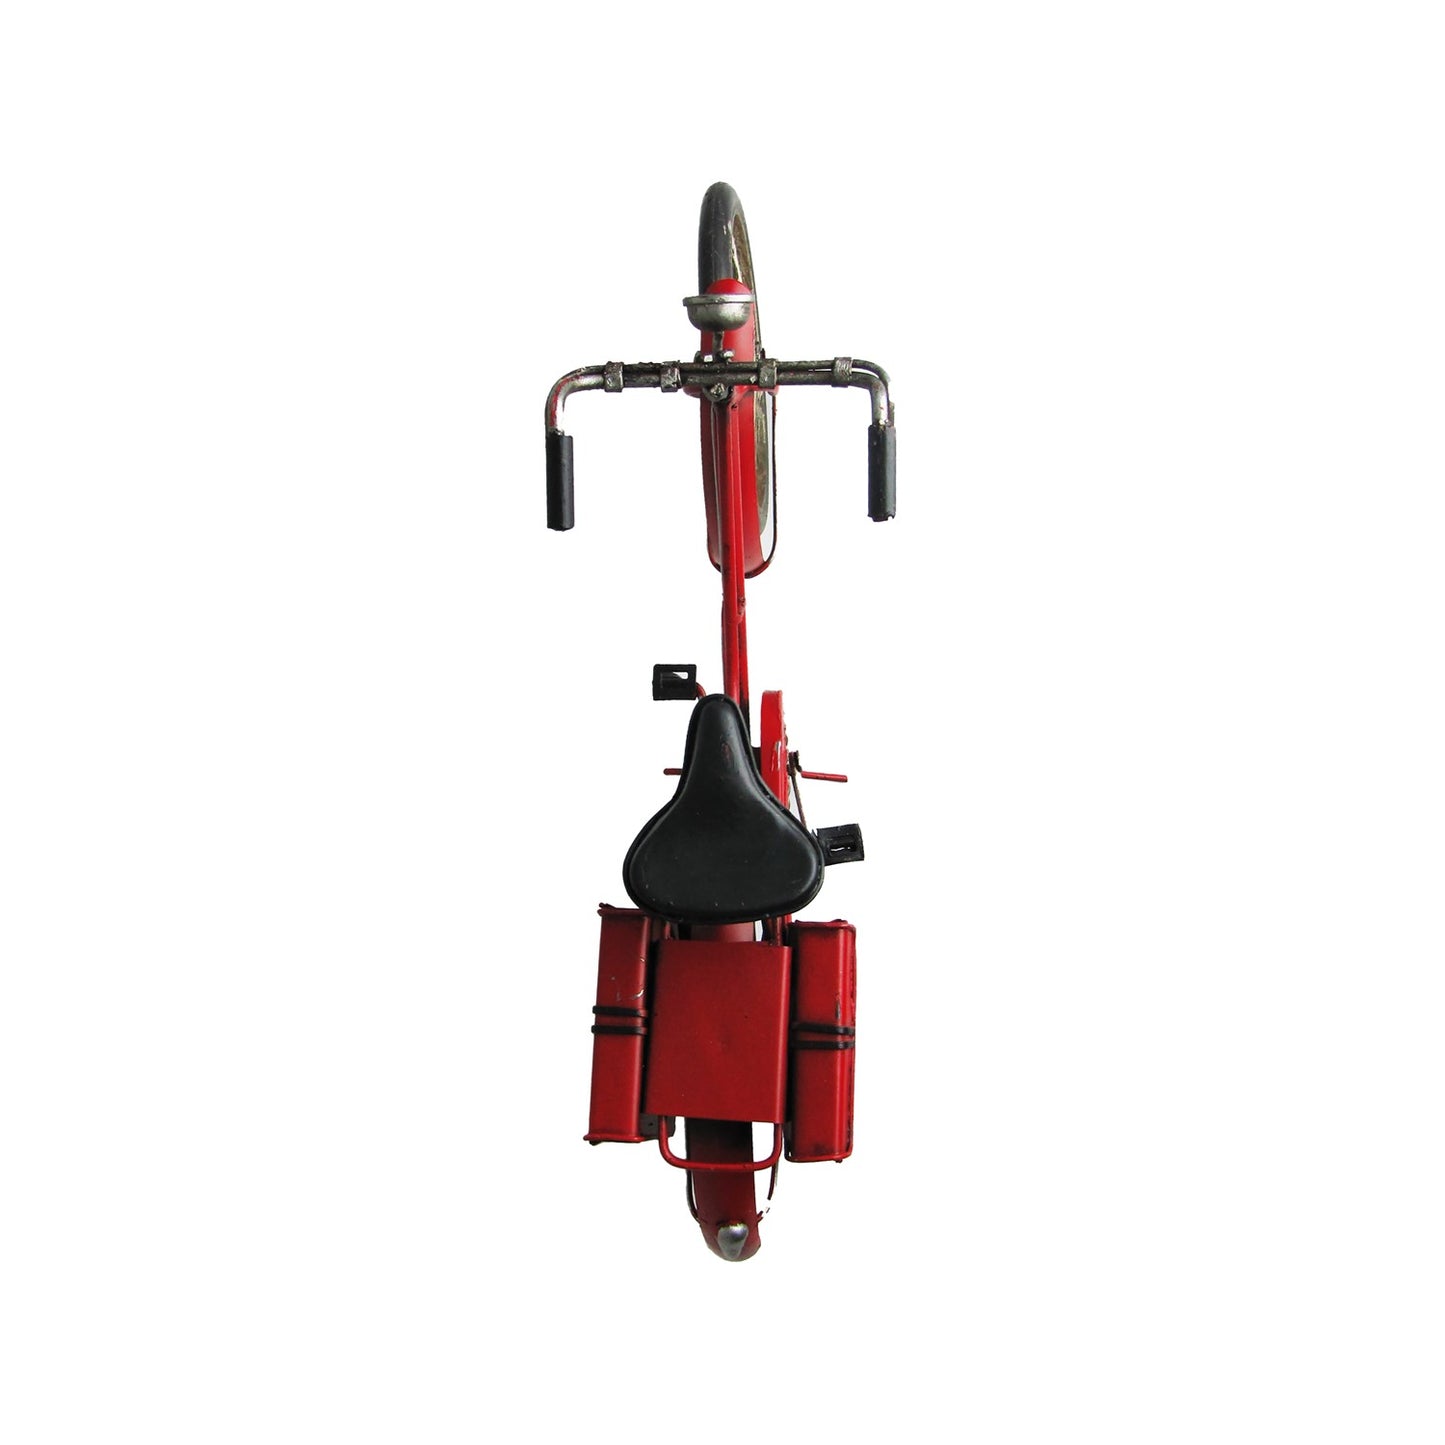 Decorative Metal Model Bicycle in Red